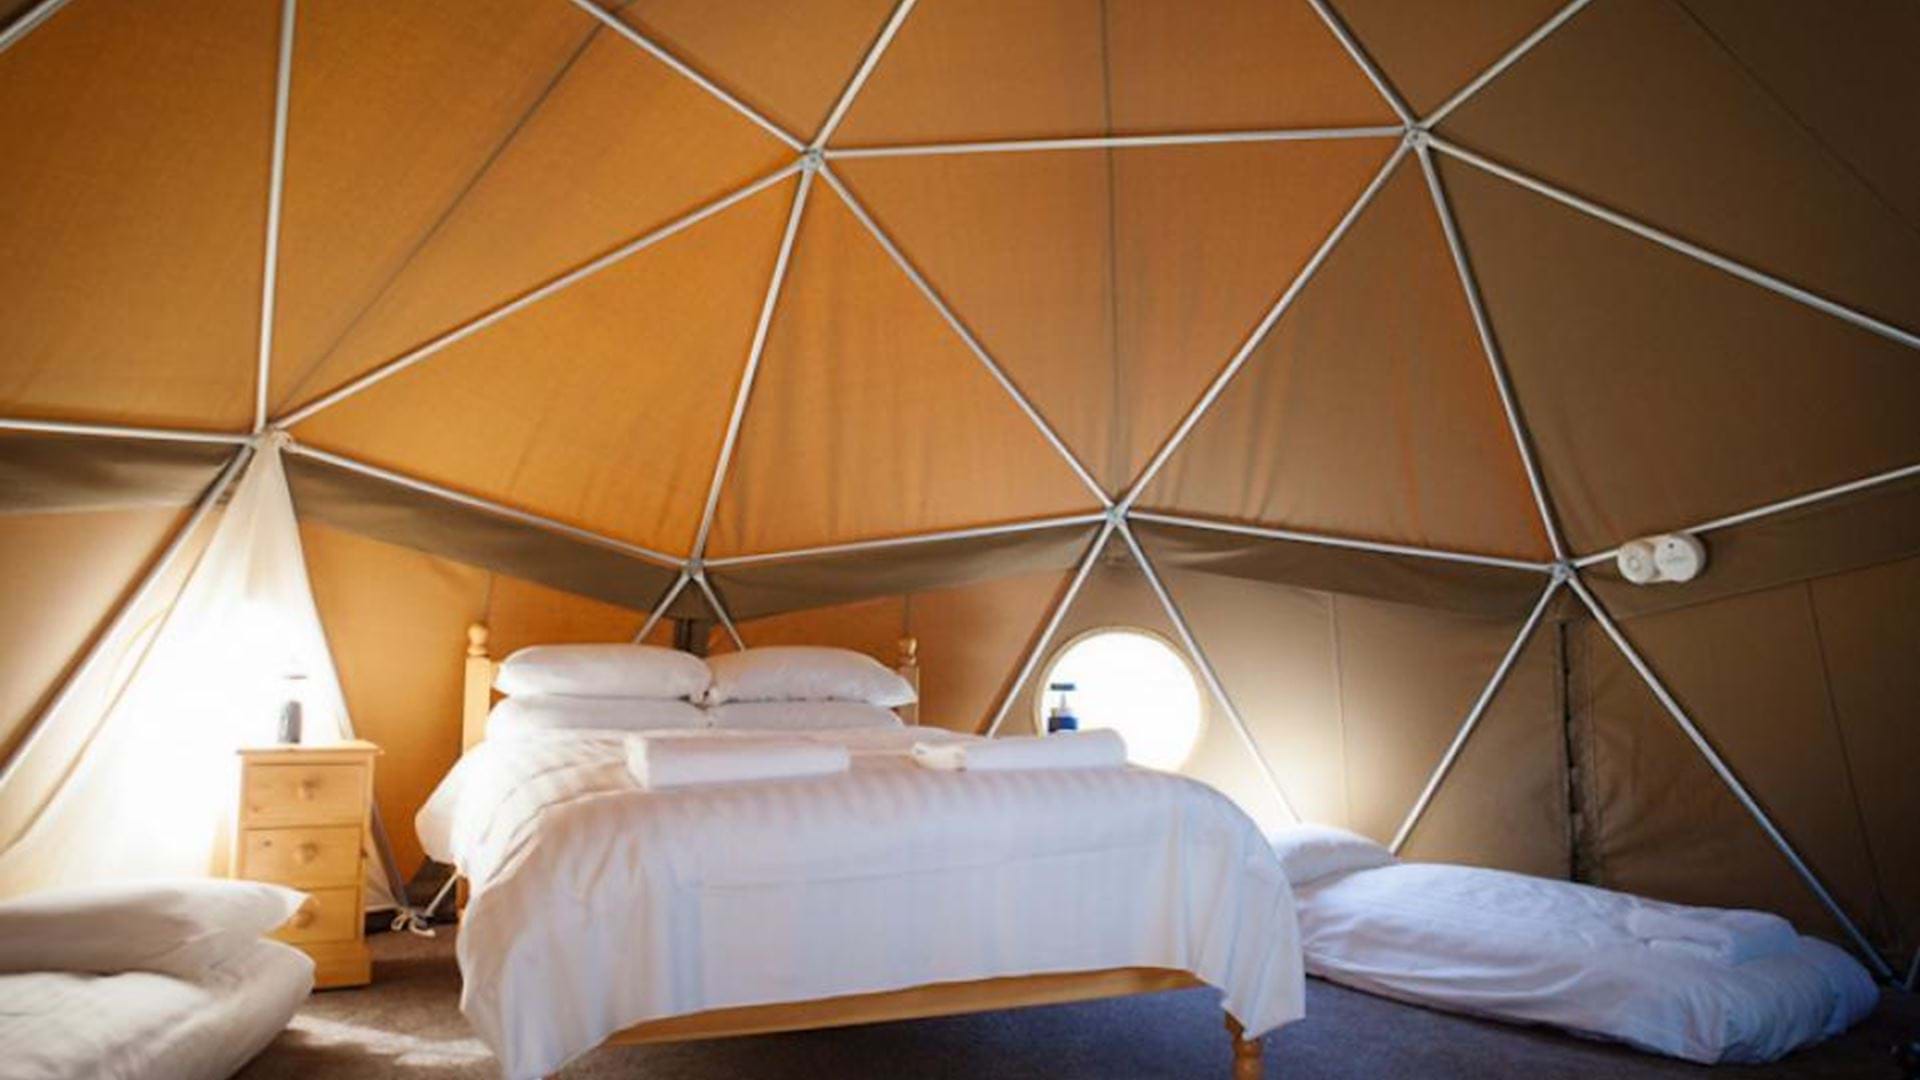 luxury-glamping-durrell-wildlife-camp-jersey-channel-islands